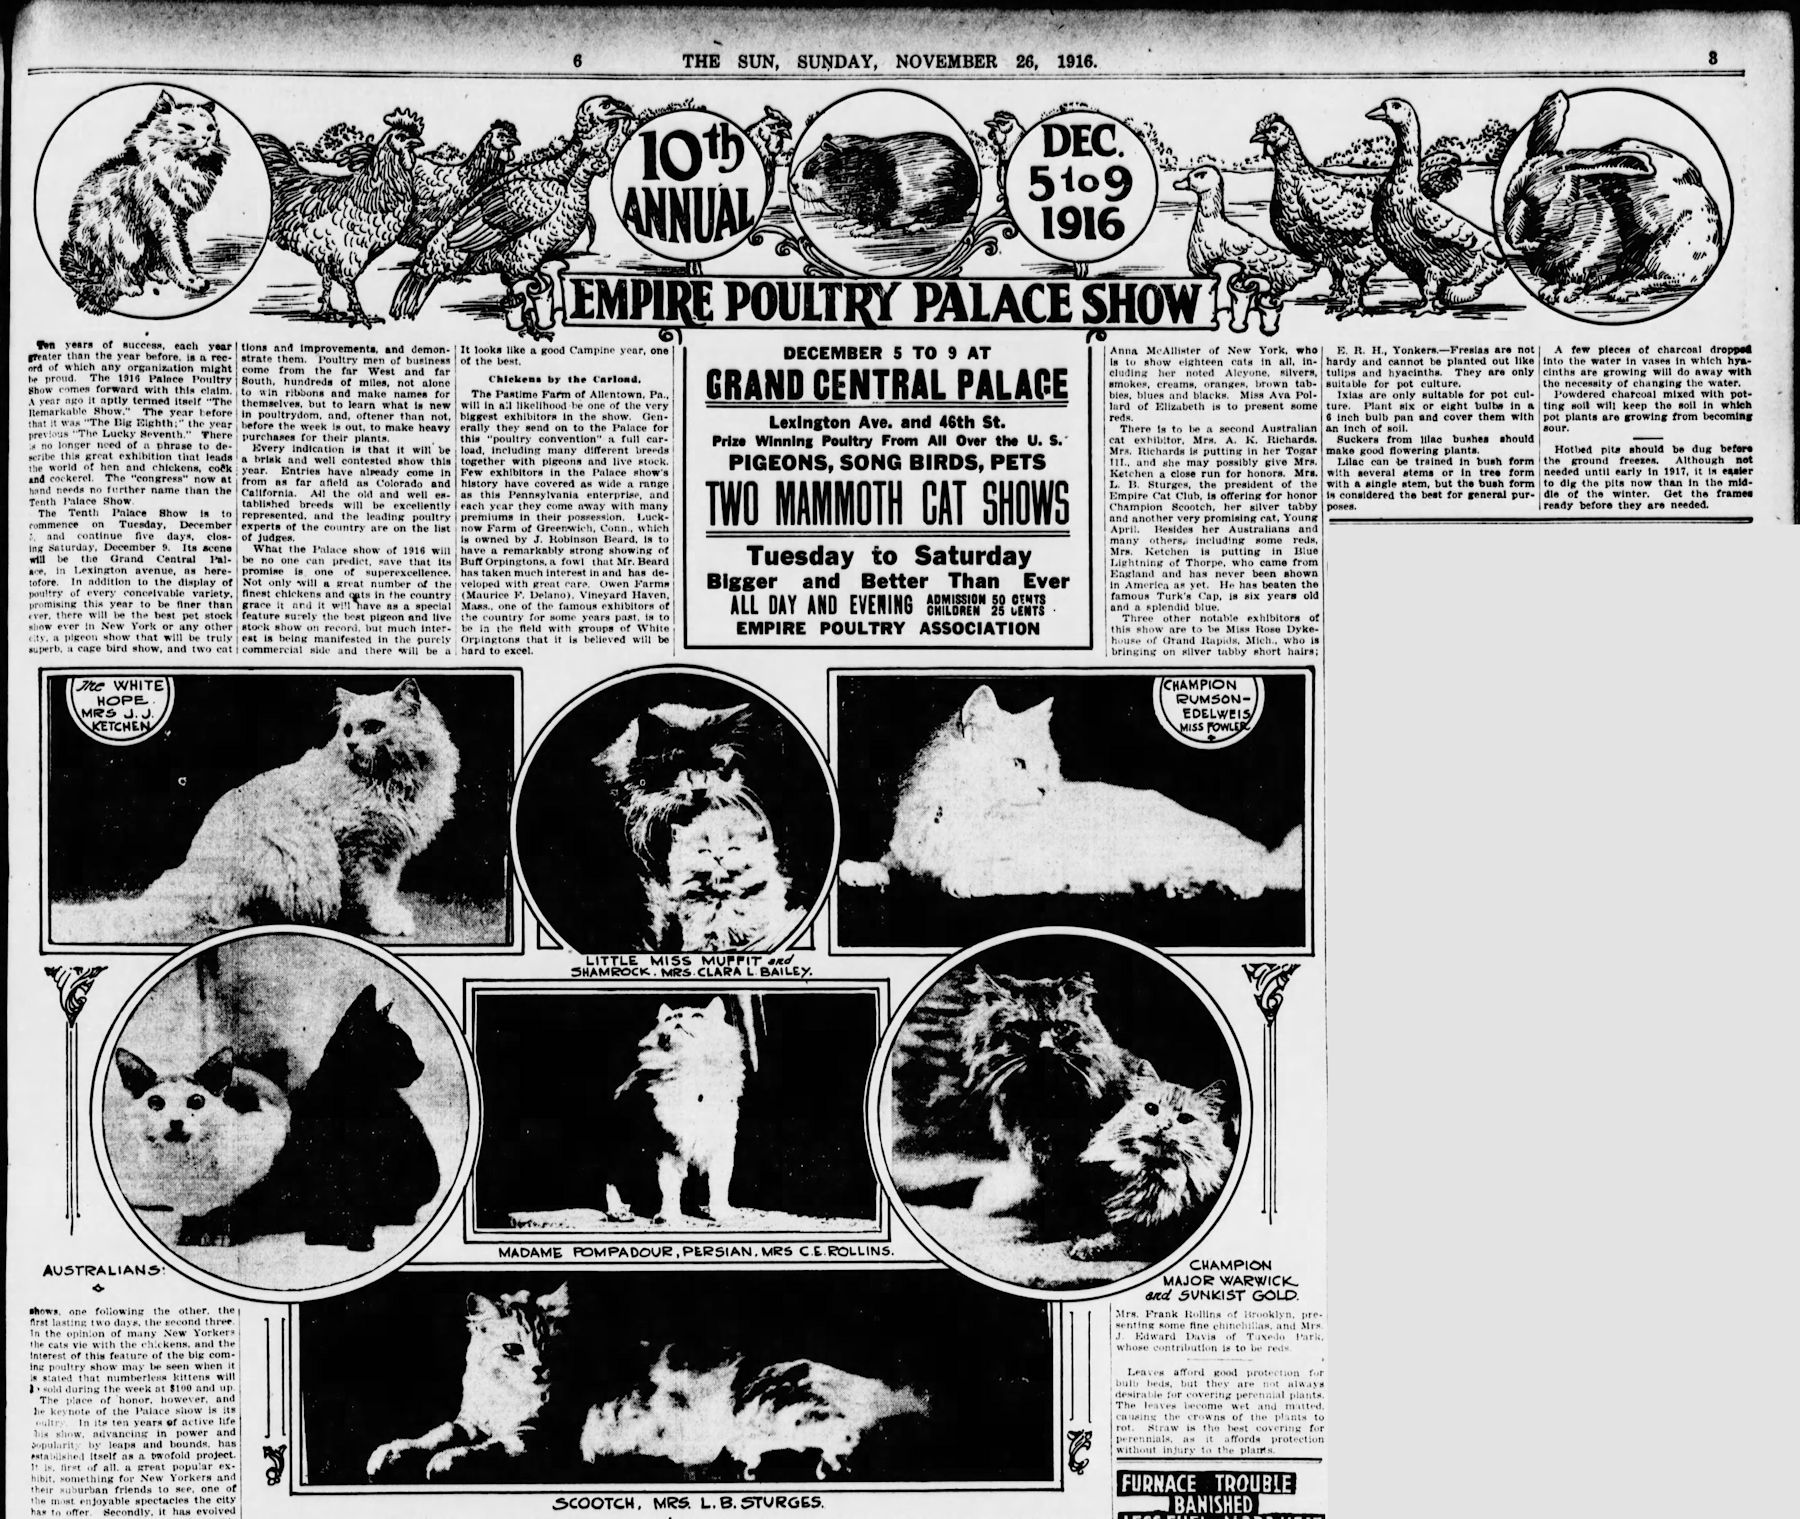 REPORTS FROM EARLY NEW YORK CAT SHOWS 1901